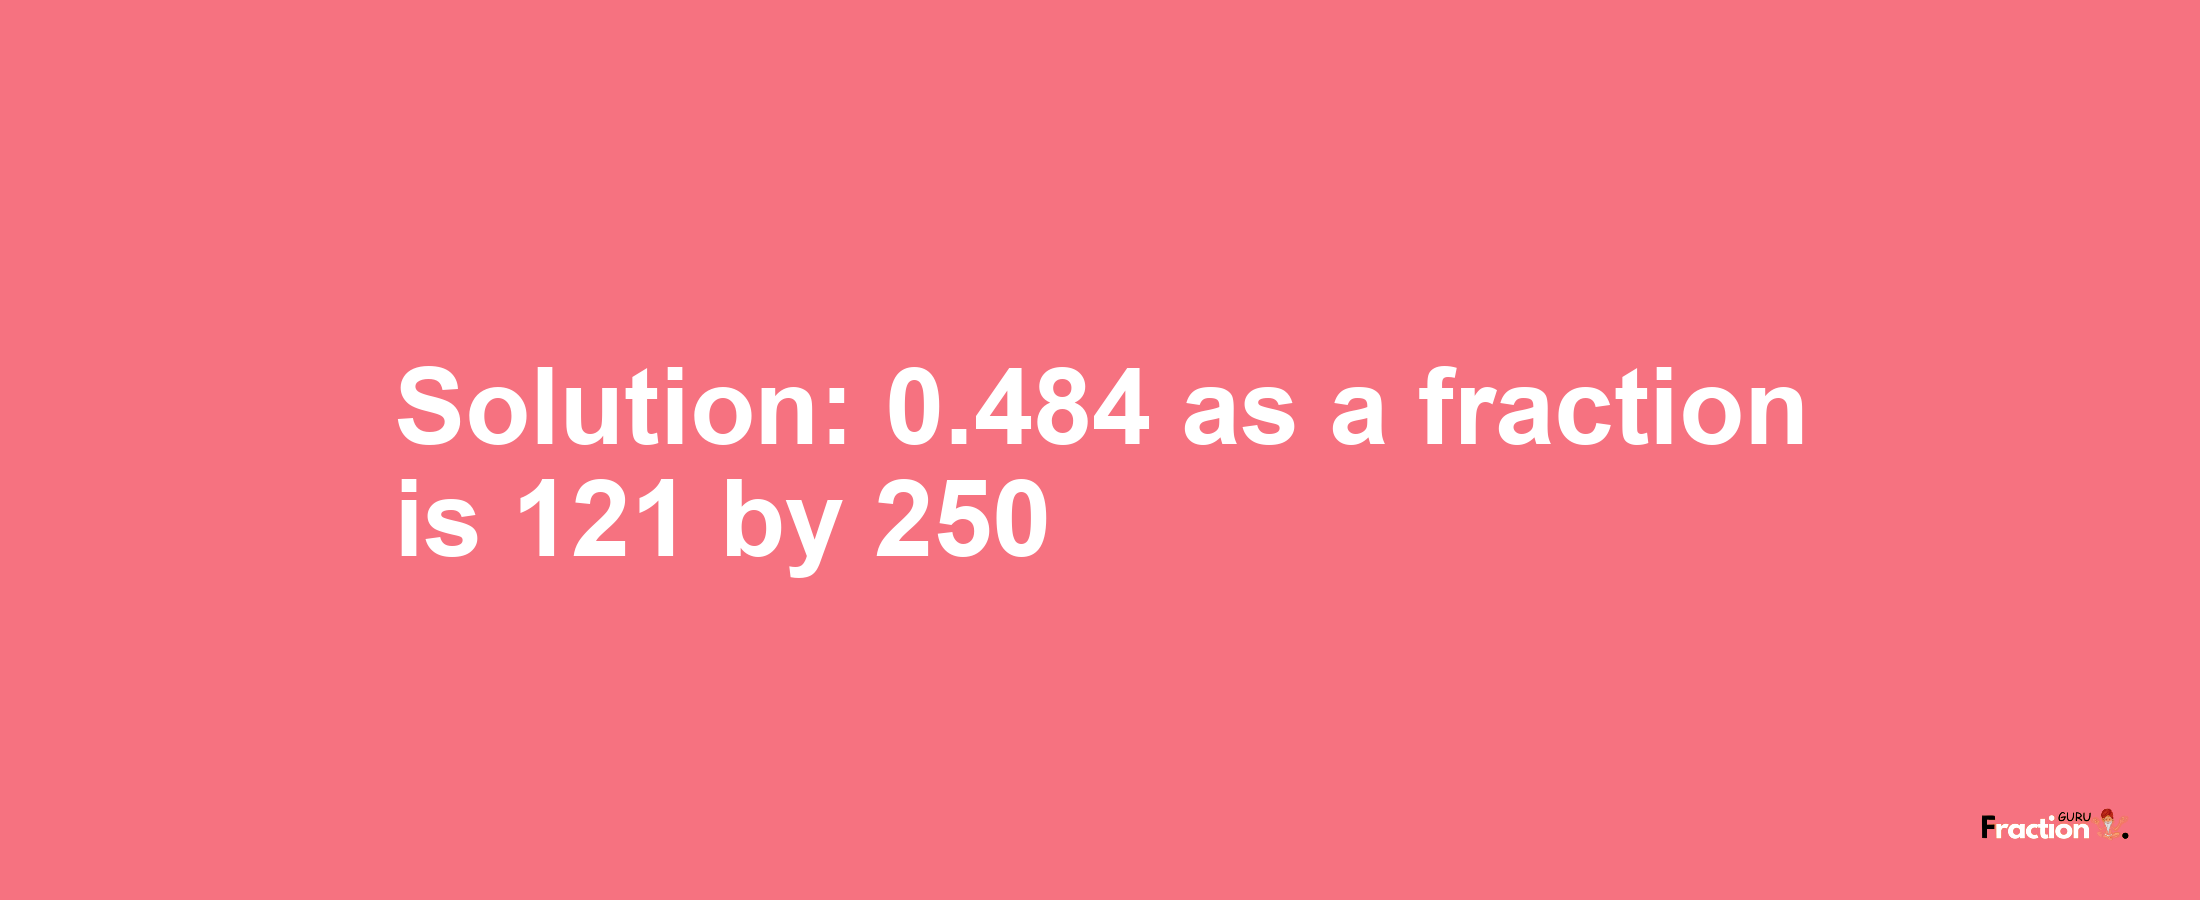 Solution:0.484 as a fraction is 121/250